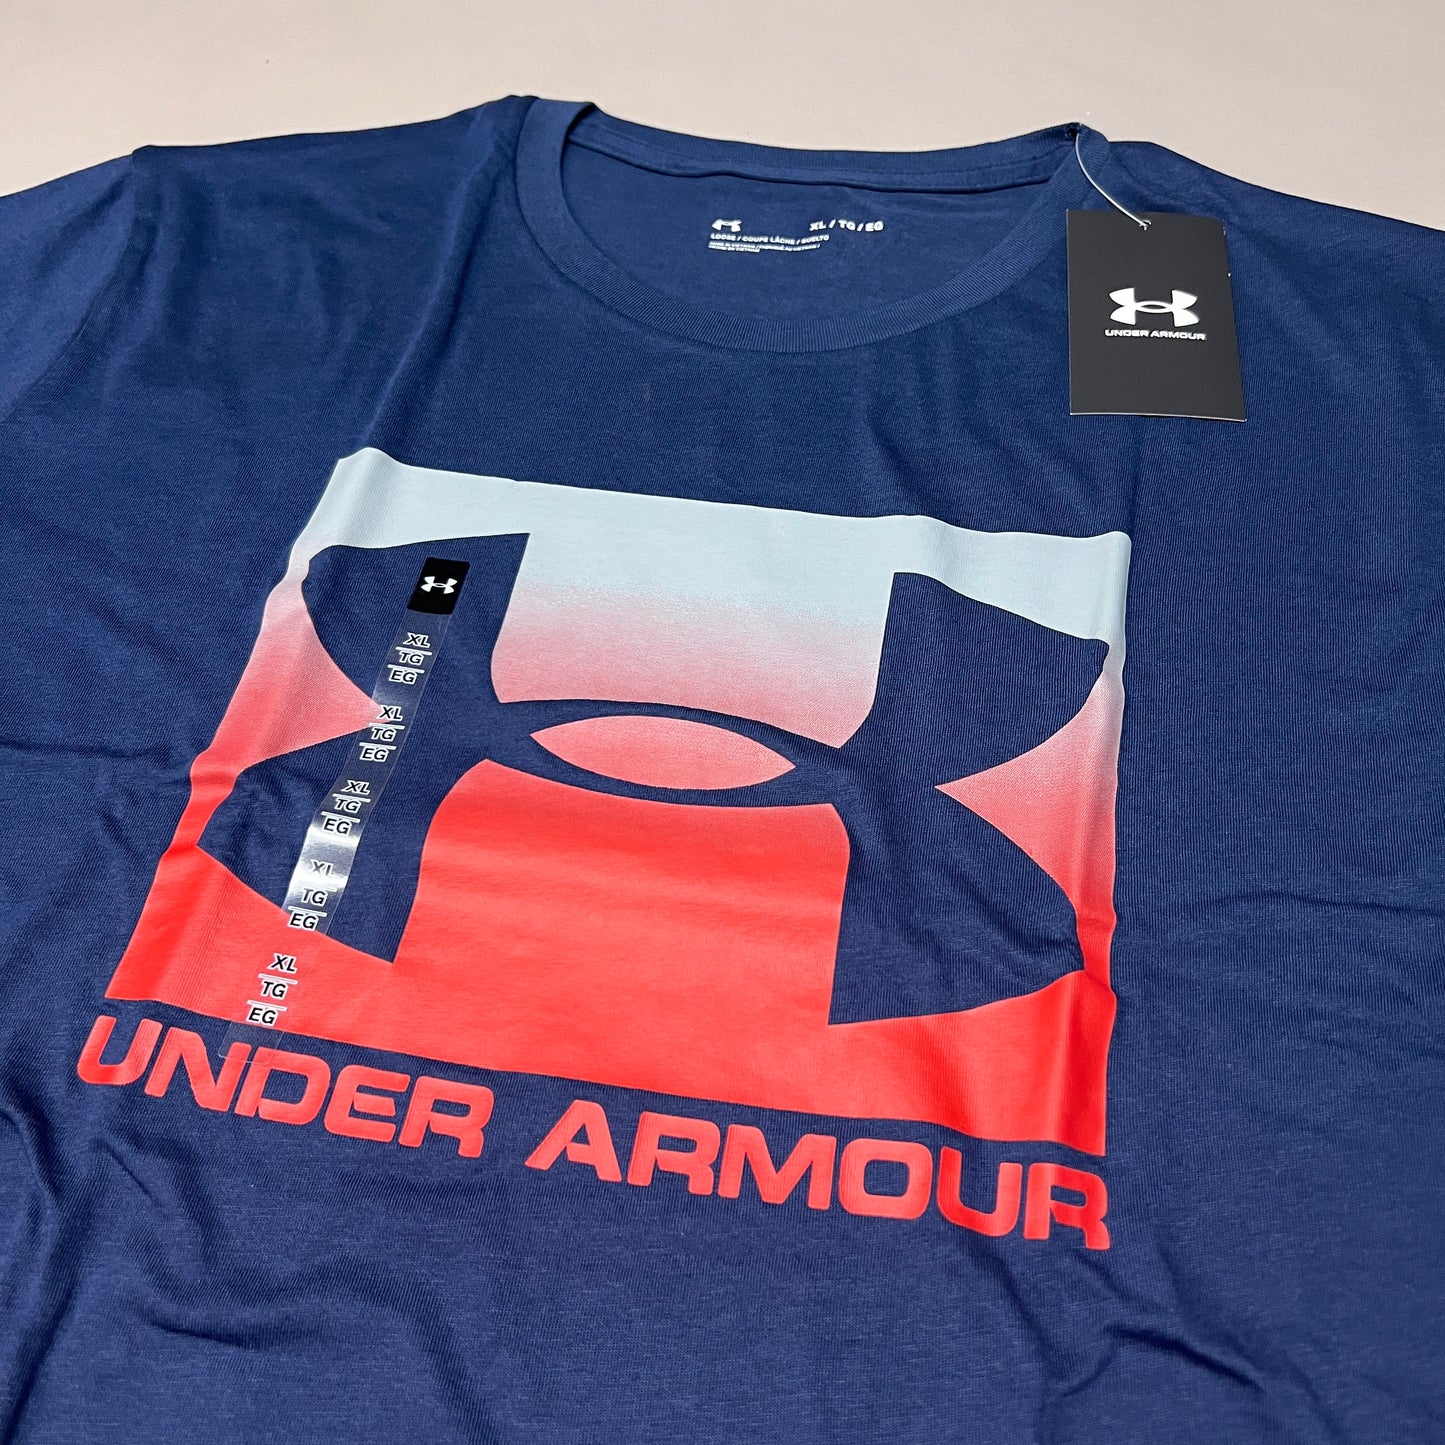 UNDER ARMOUR Boxed Sportstyle Short Sleeve T-Shirt Men's Academy / Red-408 Sz XL 1329581(New)